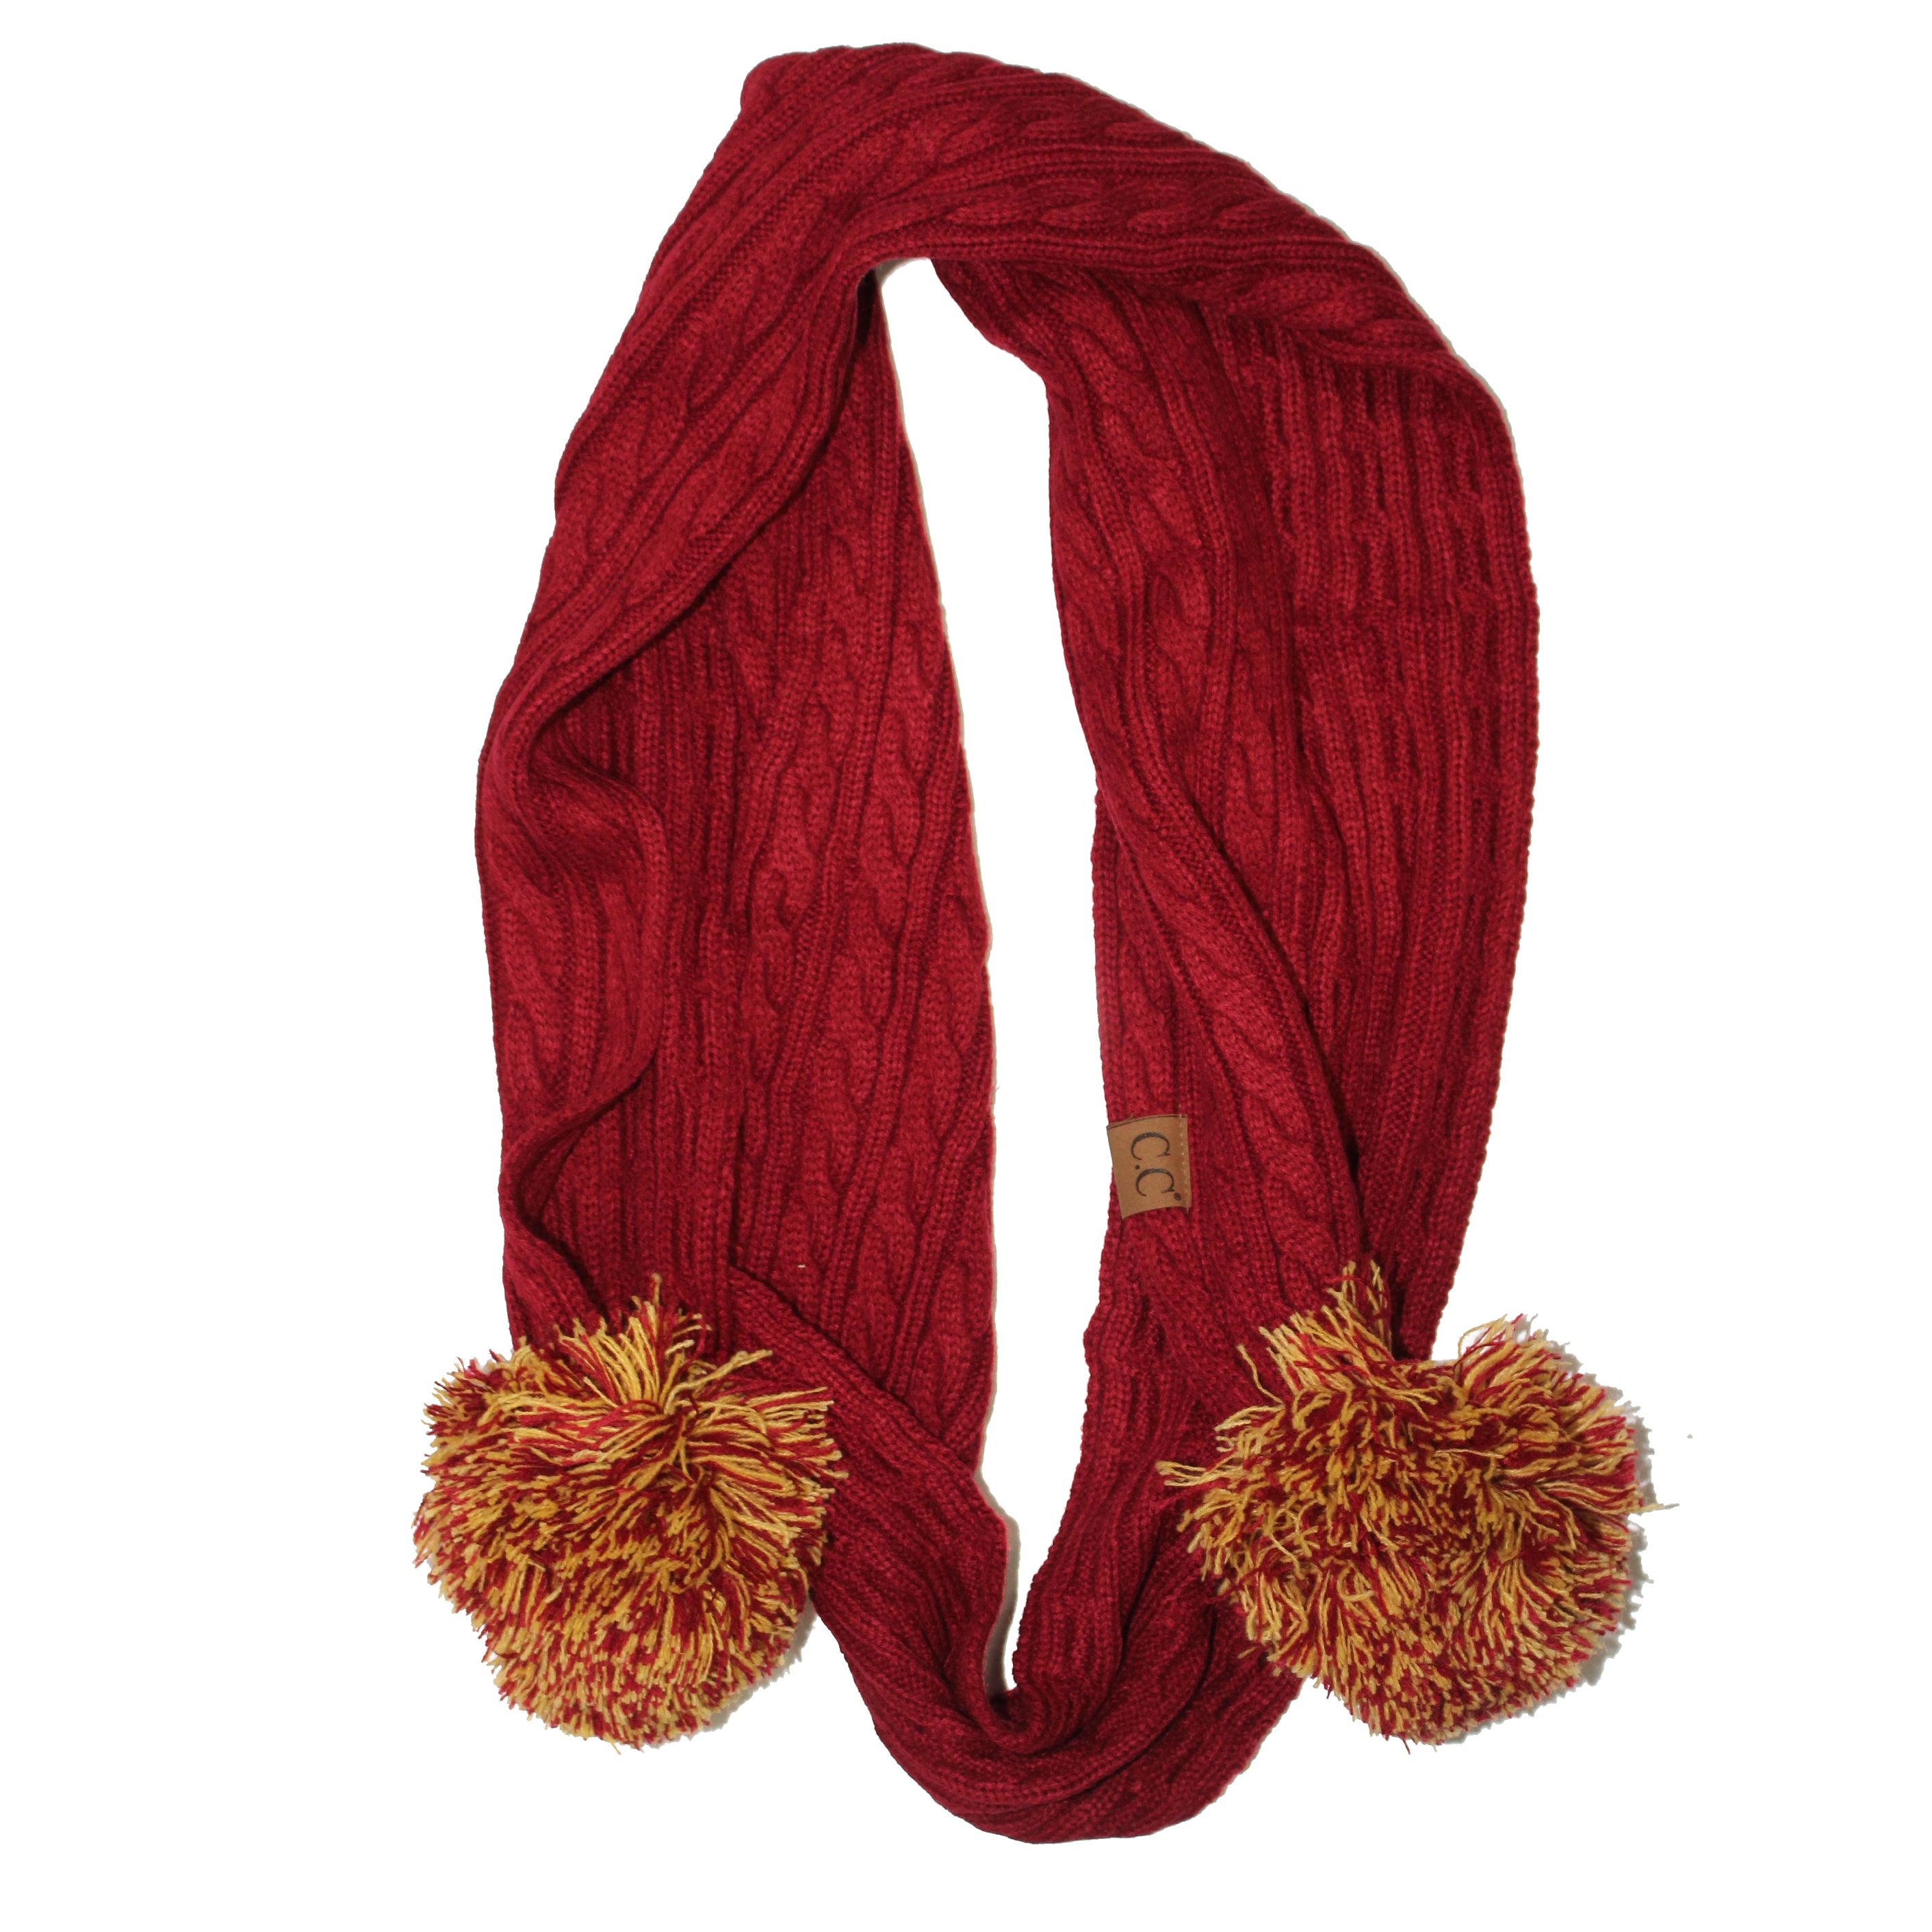 SK-56 Maroon and Gold Team Pom Scarf